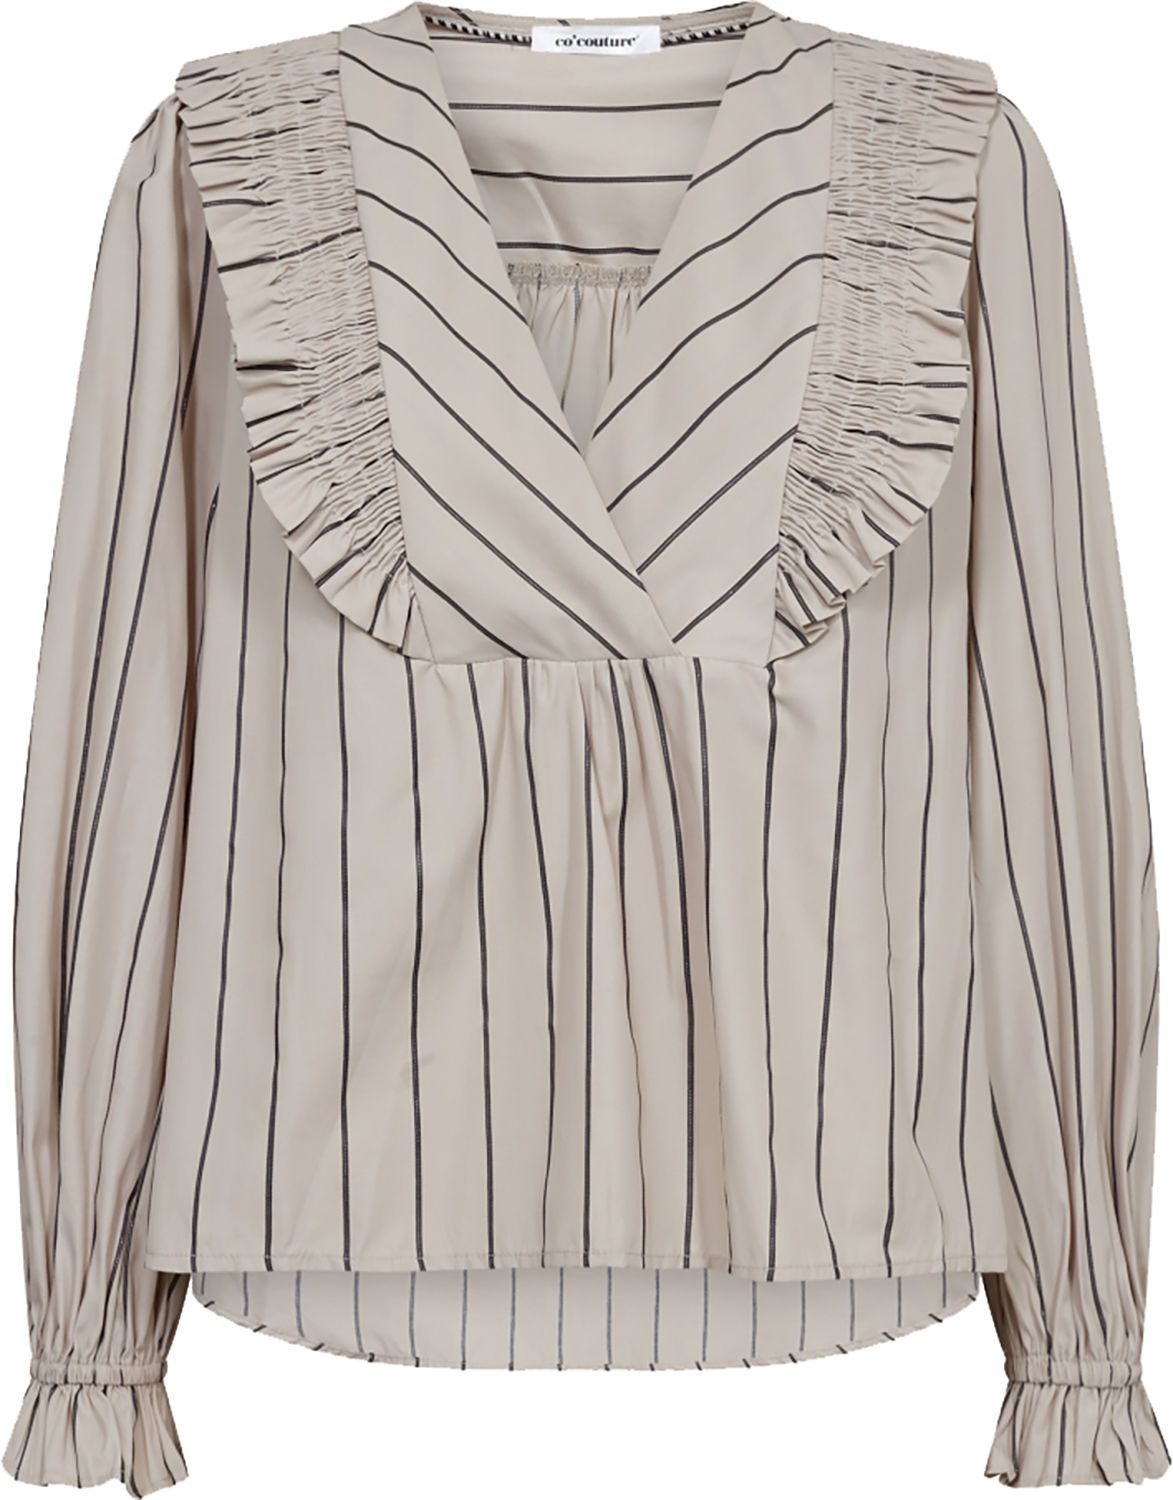 Co'couture Blouse  Ivana Smock Beige